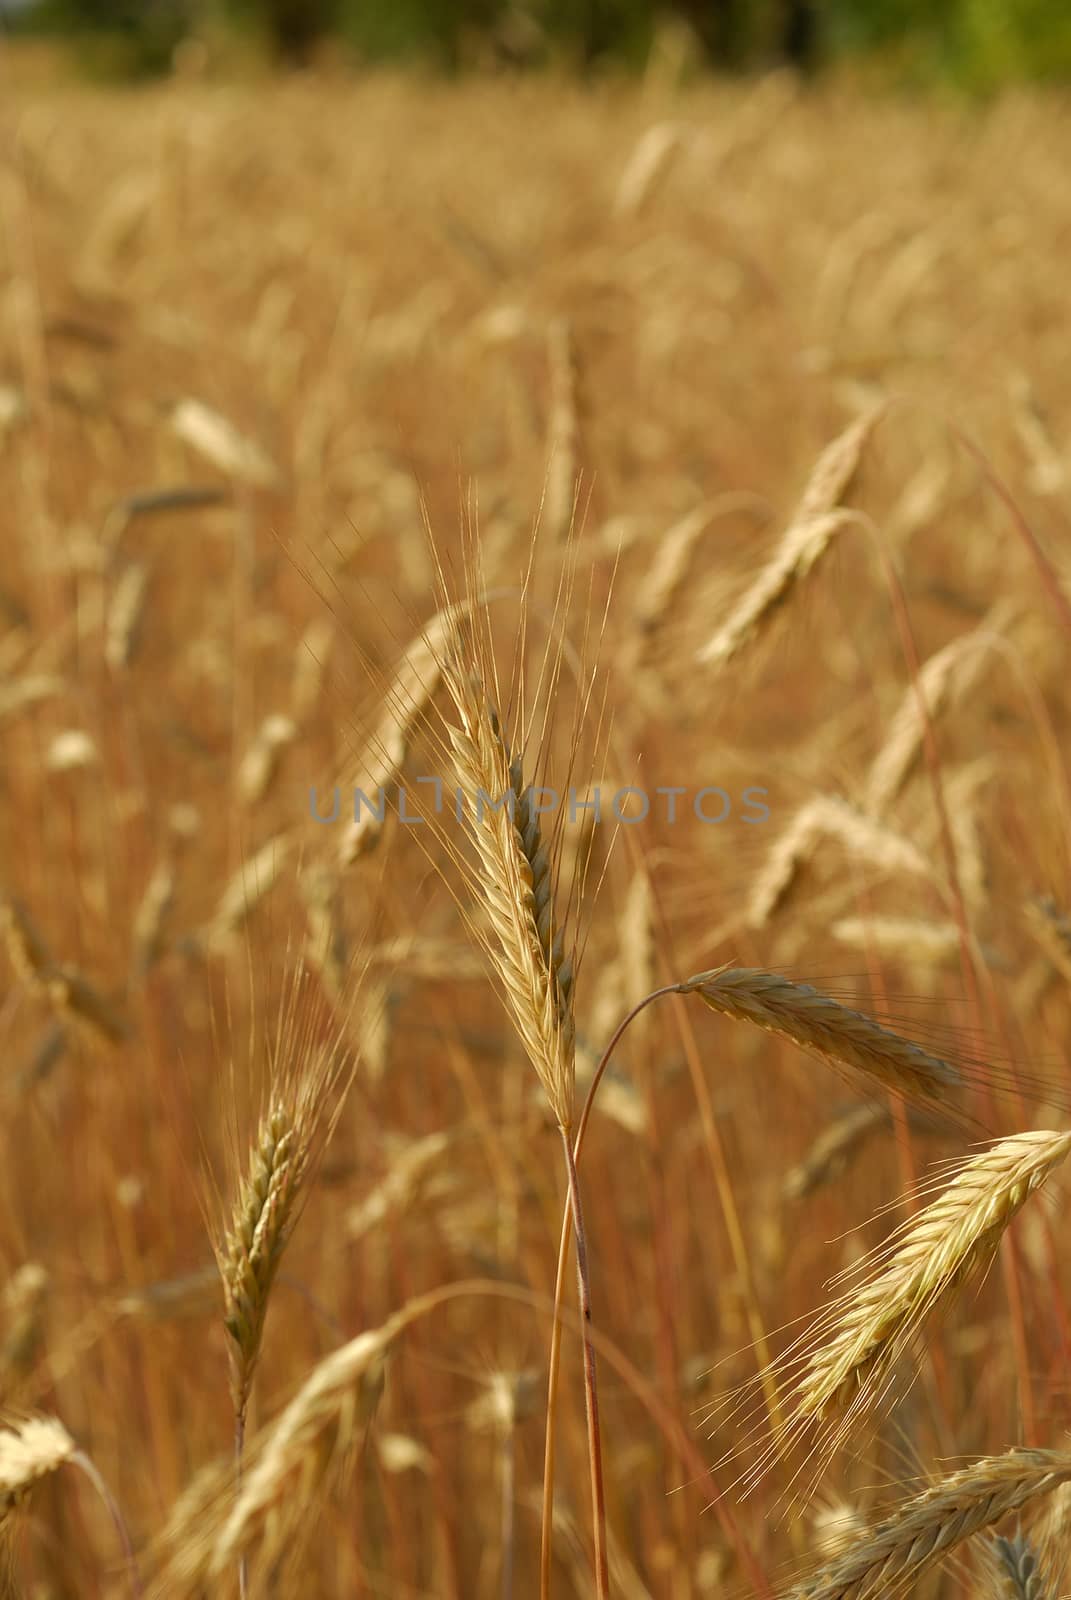 Secale cereal, Rye, Allergens Plants by jalonsohu@gmail.com